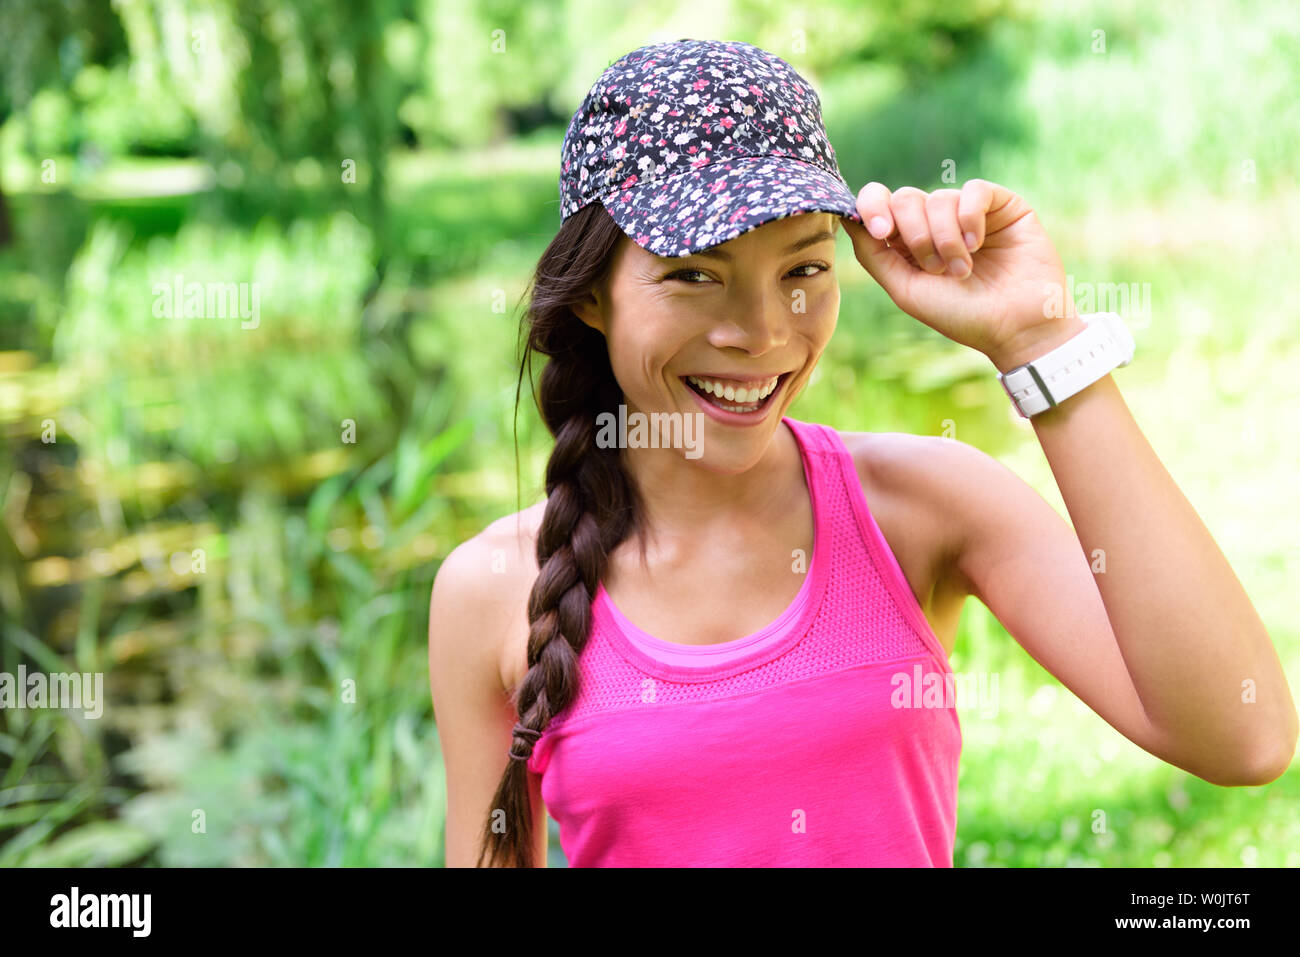 Portrait of woman runner wearing running cap. Female athlete smiling happy at camera after jogging in city park wearing floral headwear hat. Stock Photo